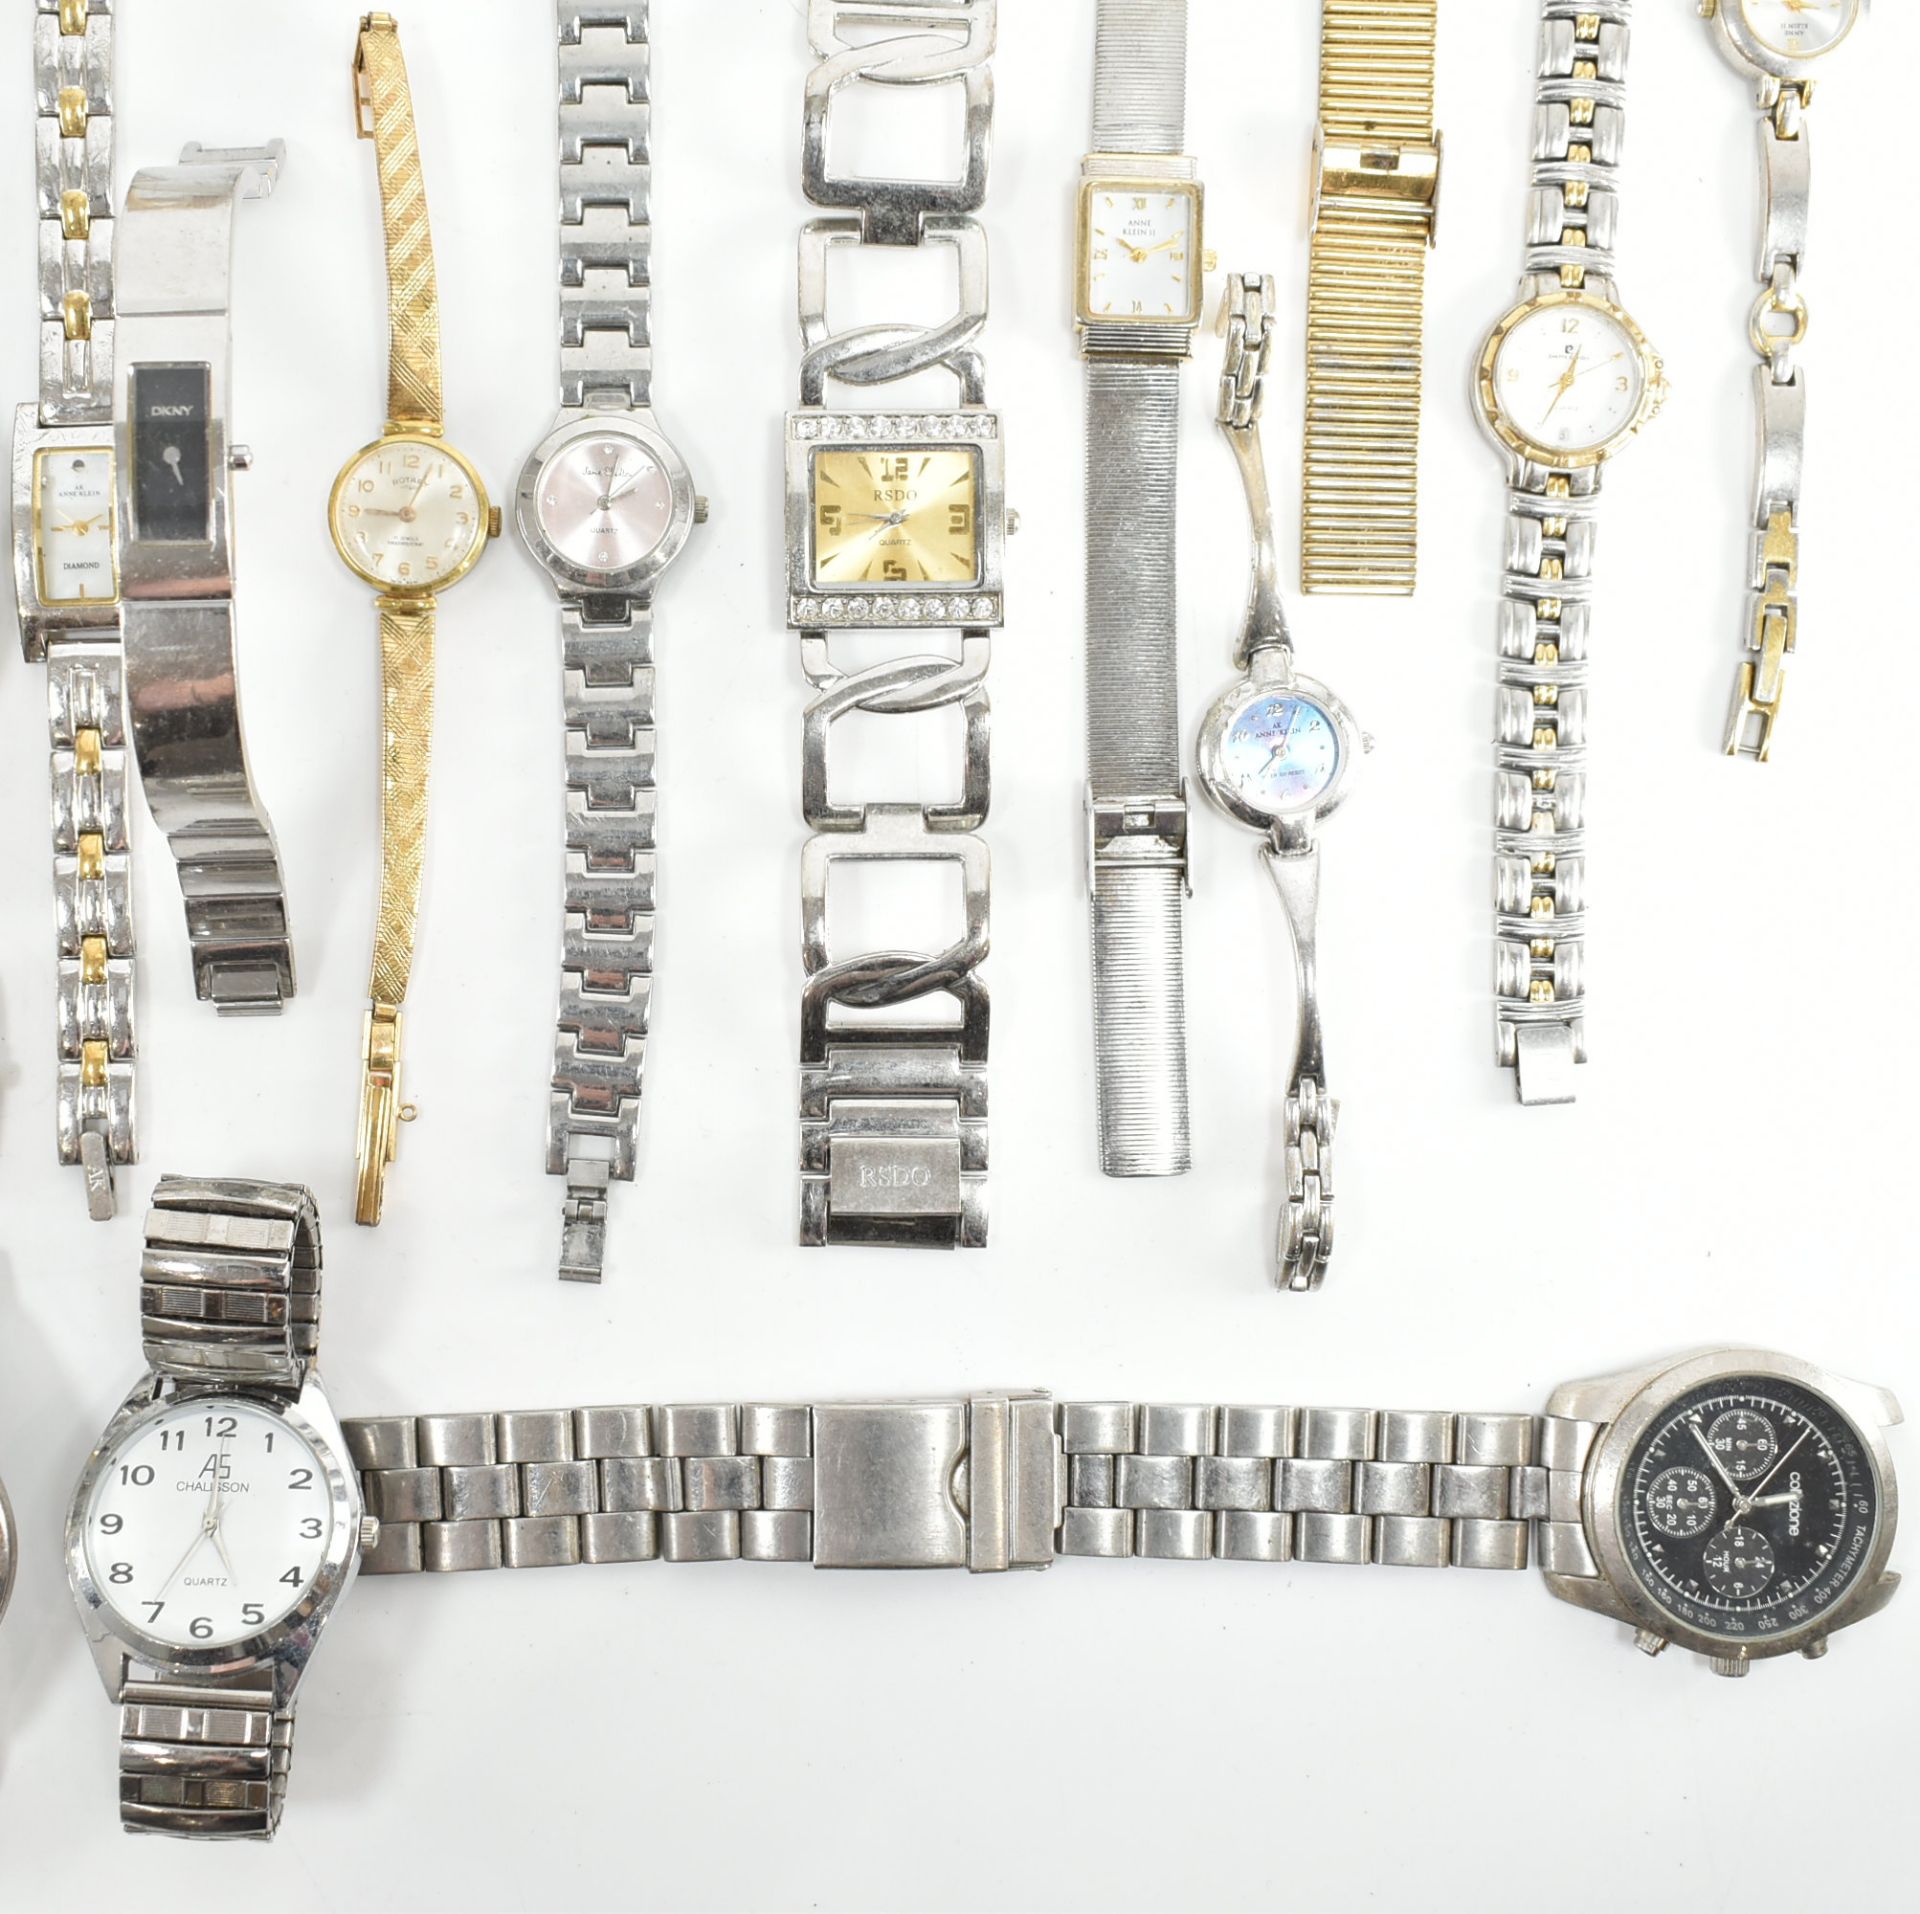 COLLECTION OF ASSORTED GOLD & SILVER TONE WRISTWATCHES - Image 4 of 17